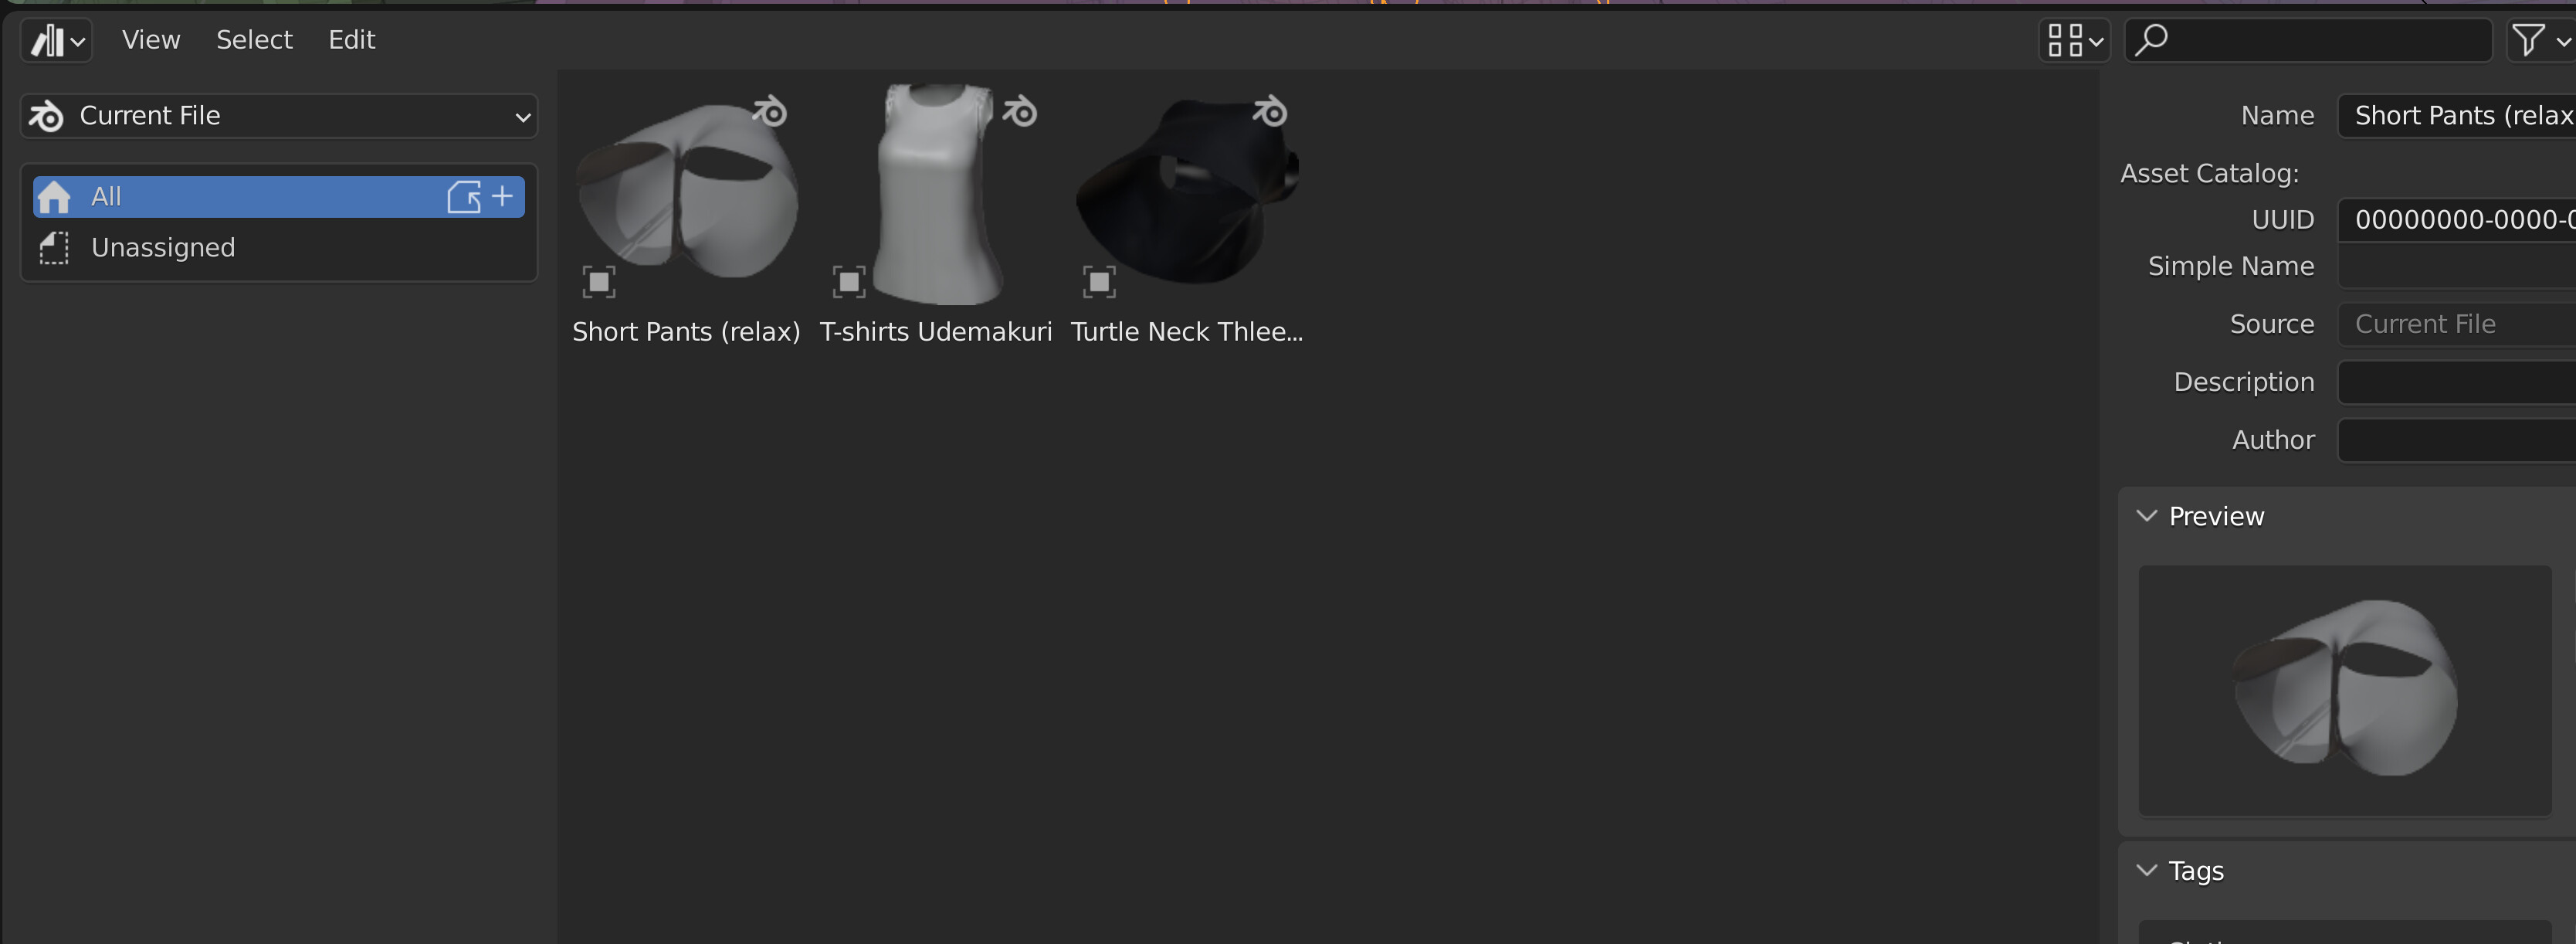 GitHub - TheDuckCow/pose-tools: A set of tools for improving and extending  the use of the blender pose library for character animation.